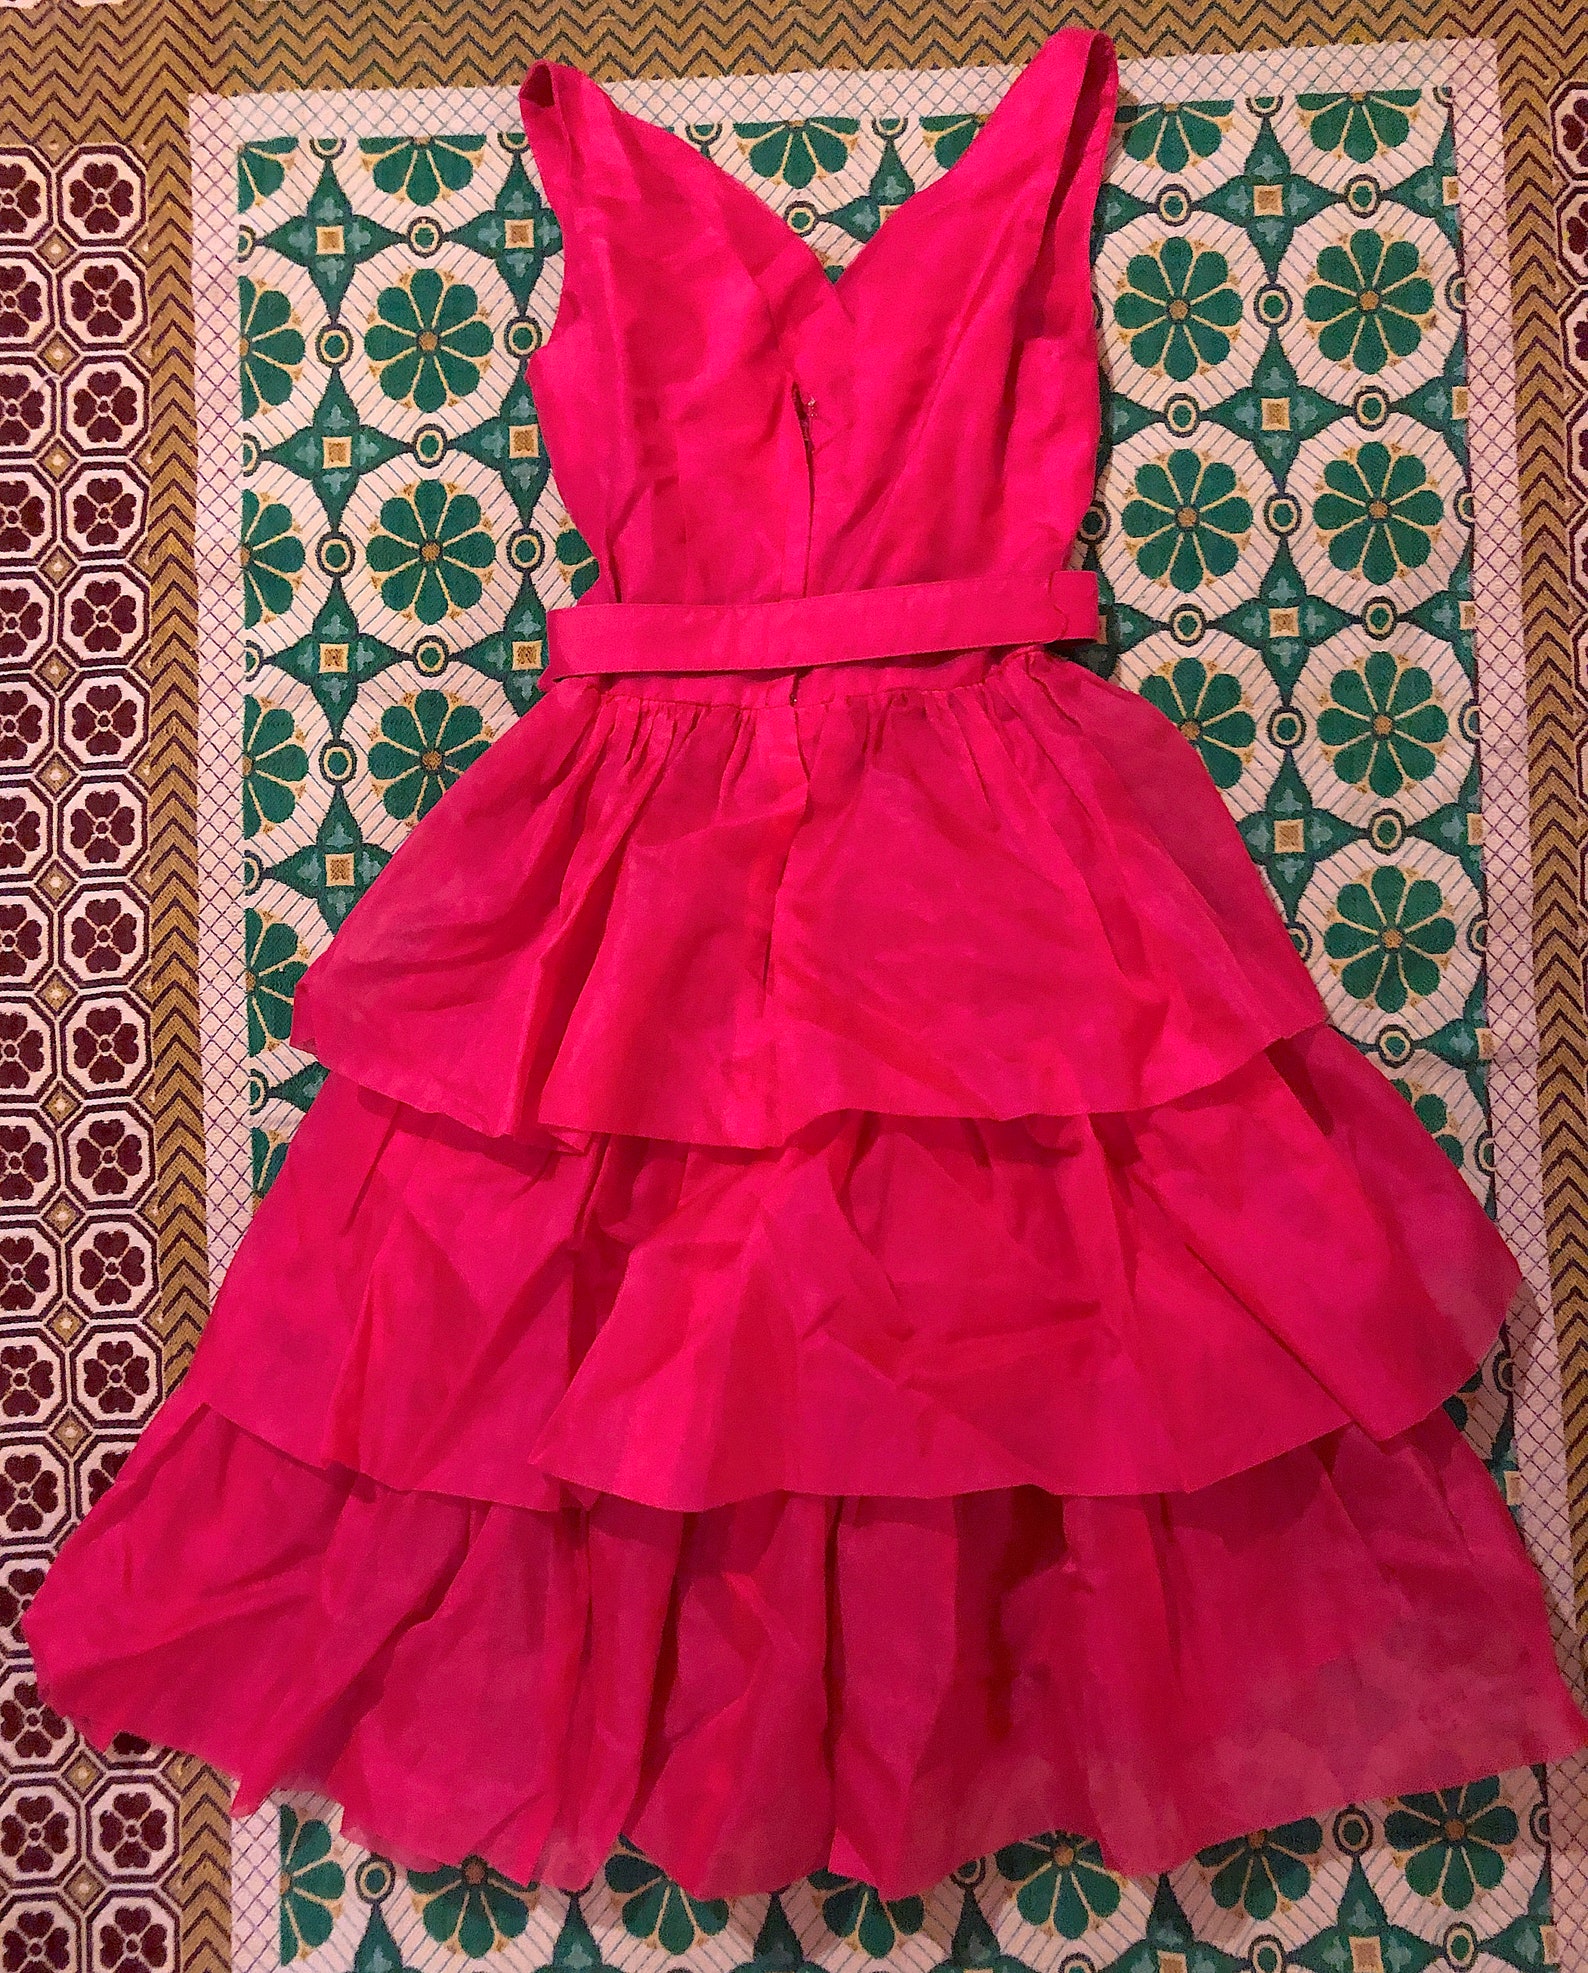 Vintage 1960s Hot Pink Ruffled Tiered Cocktail Dress by | Etsy